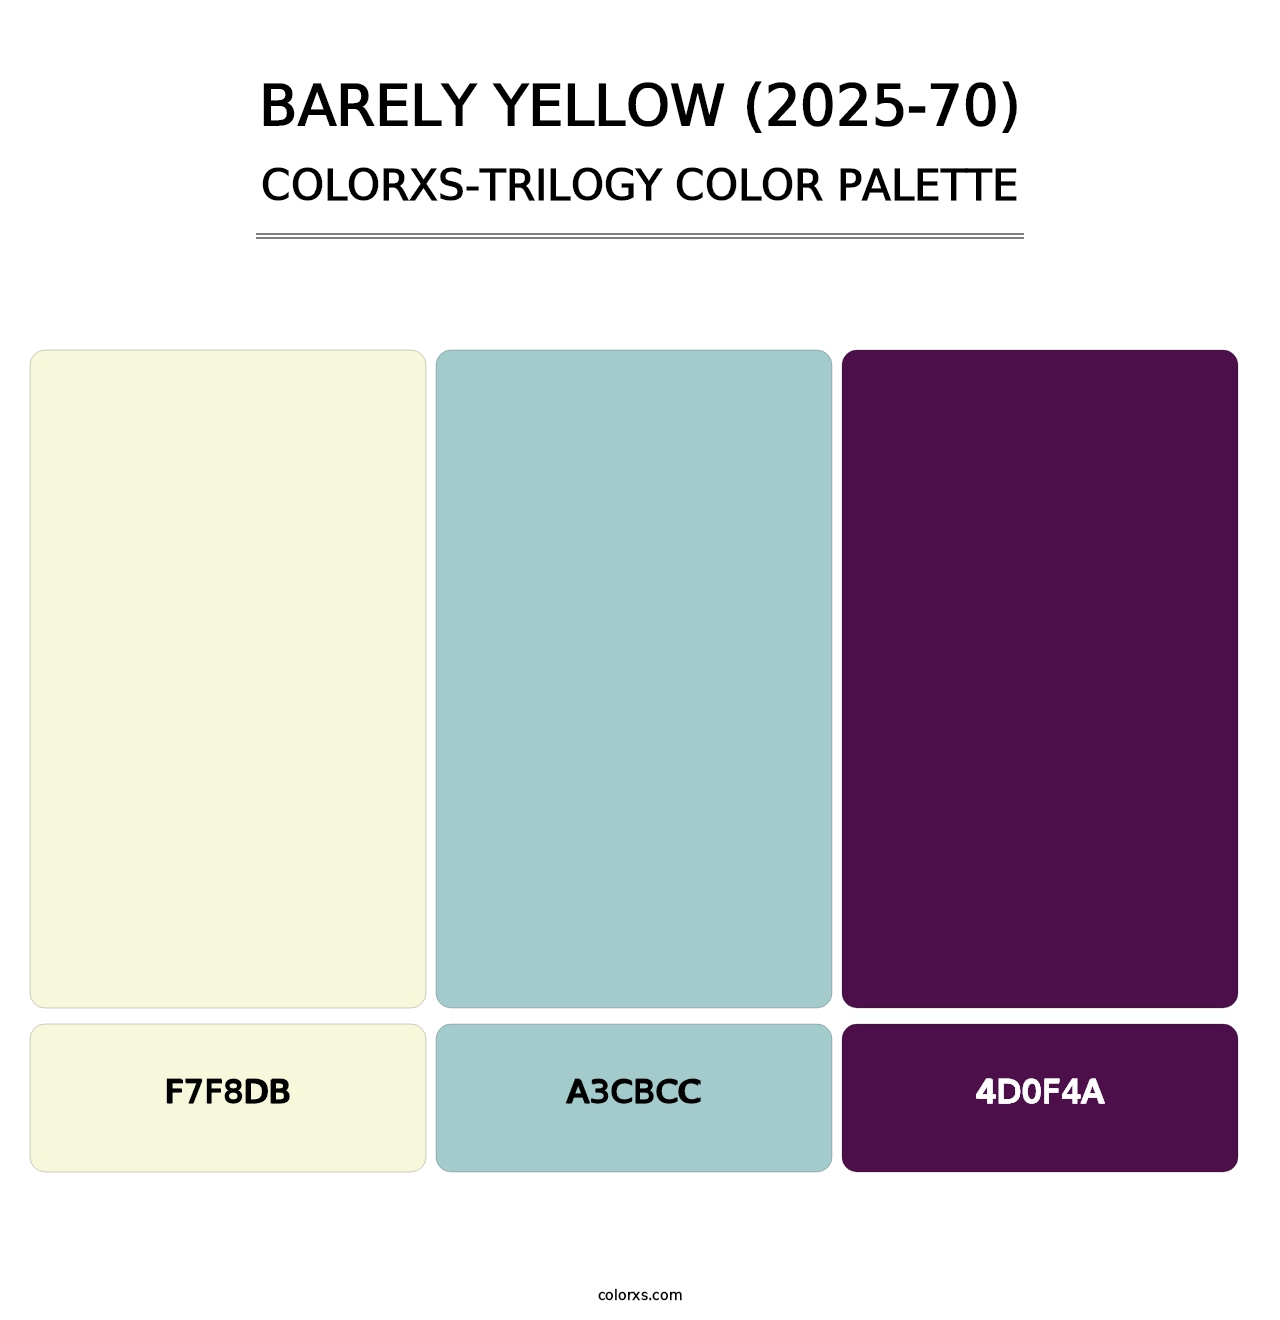 Barely Yellow (2025-70) - Colorxs Trilogy Palette